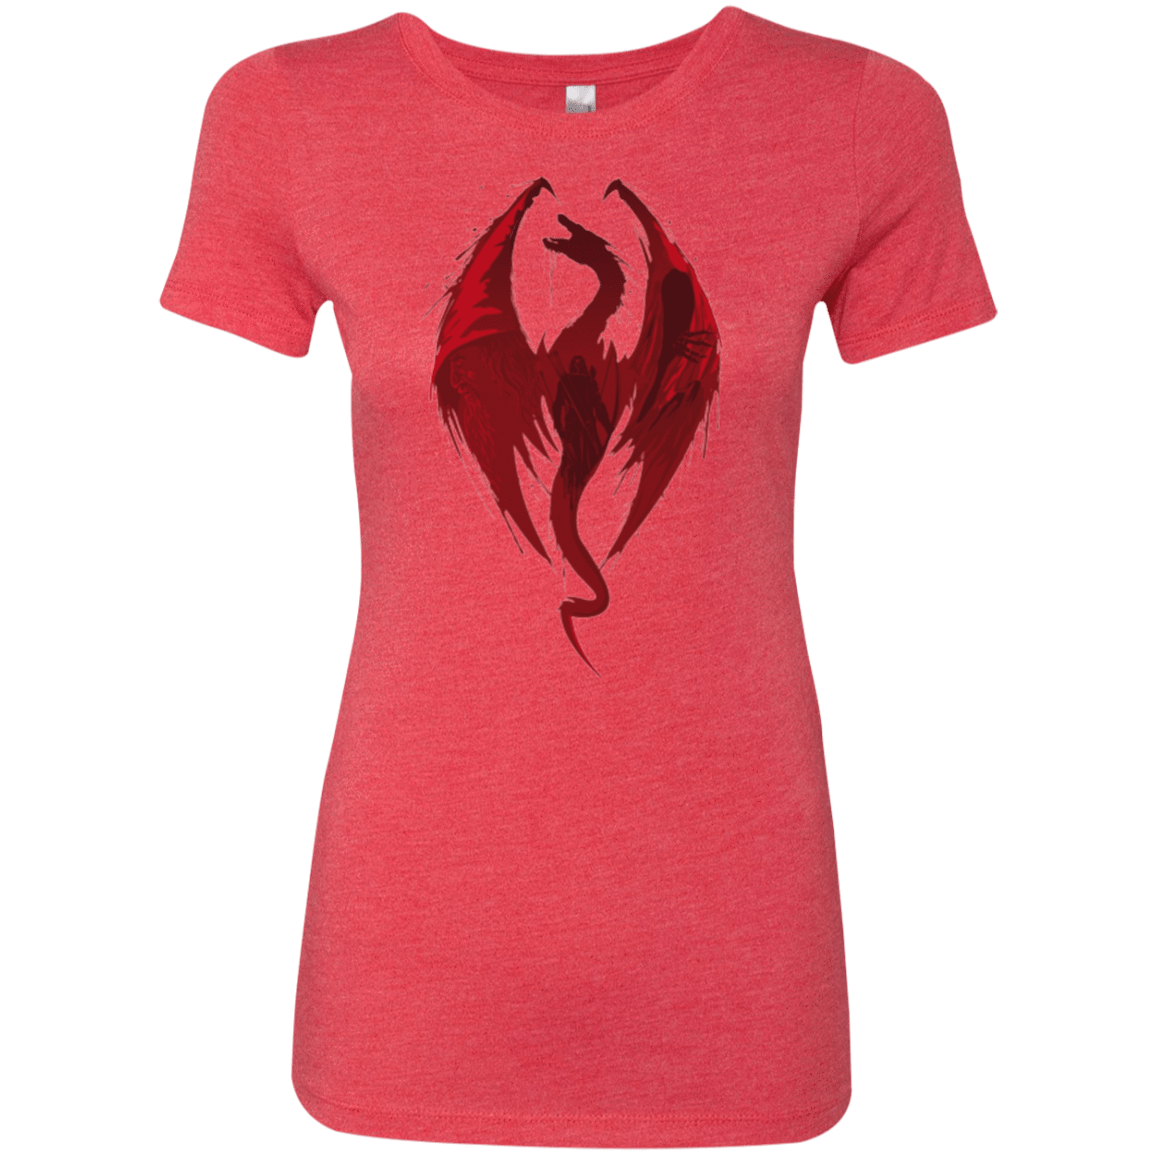 T-Shirts Vintage Red / Small Smaug's Bane Women's Triblend T-Shirt